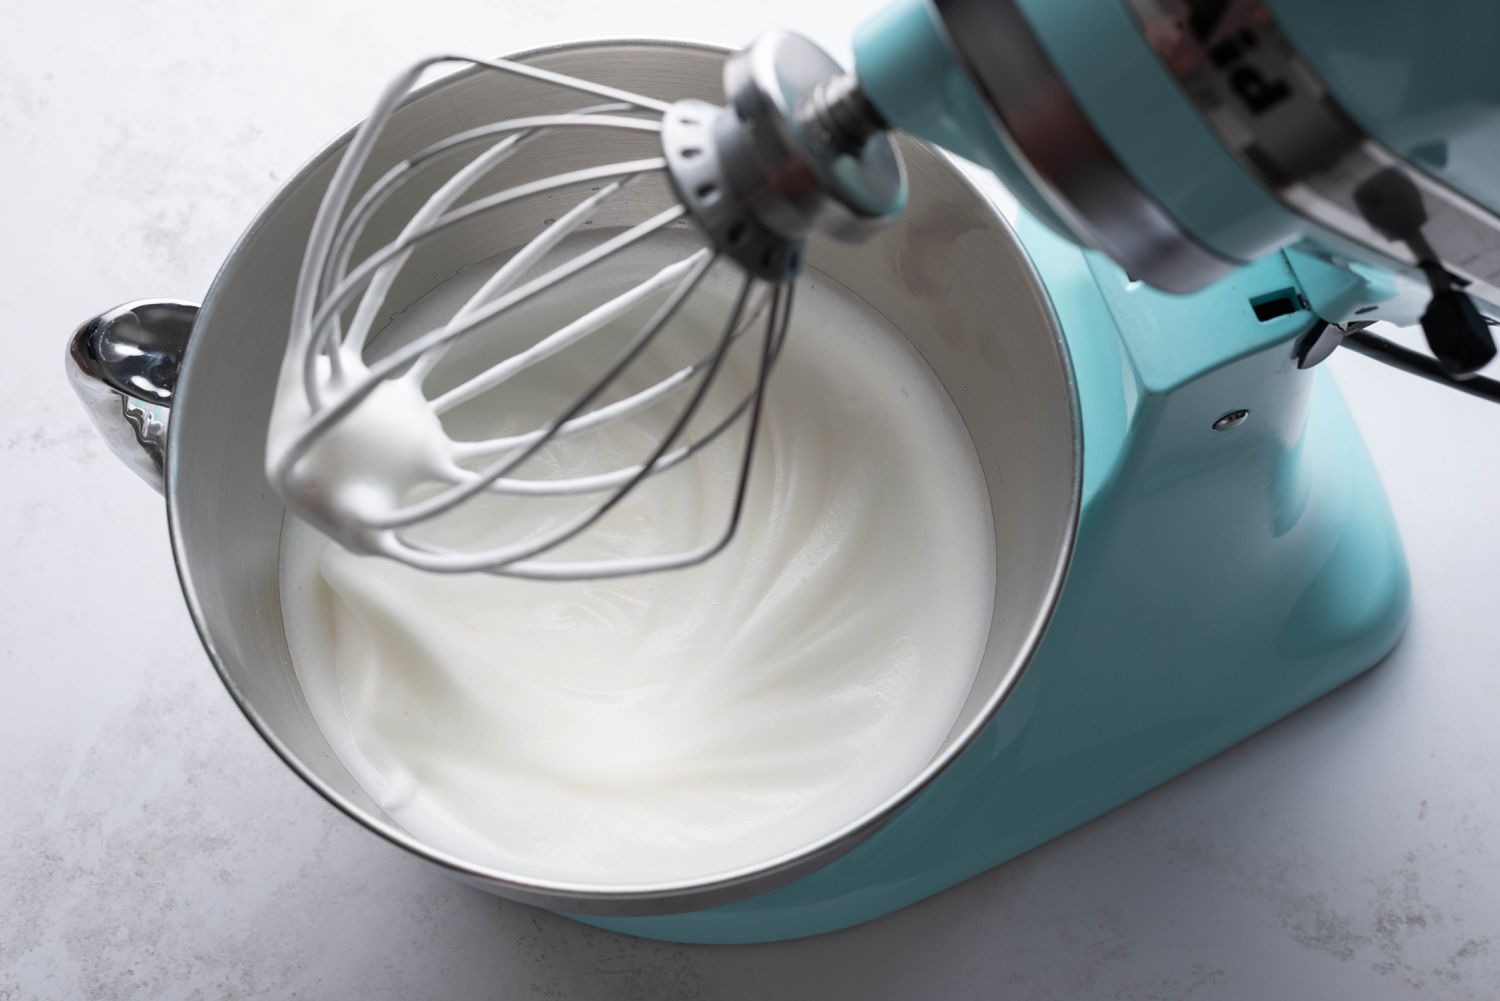 egg whites beat into stiff peaks in stand mixer